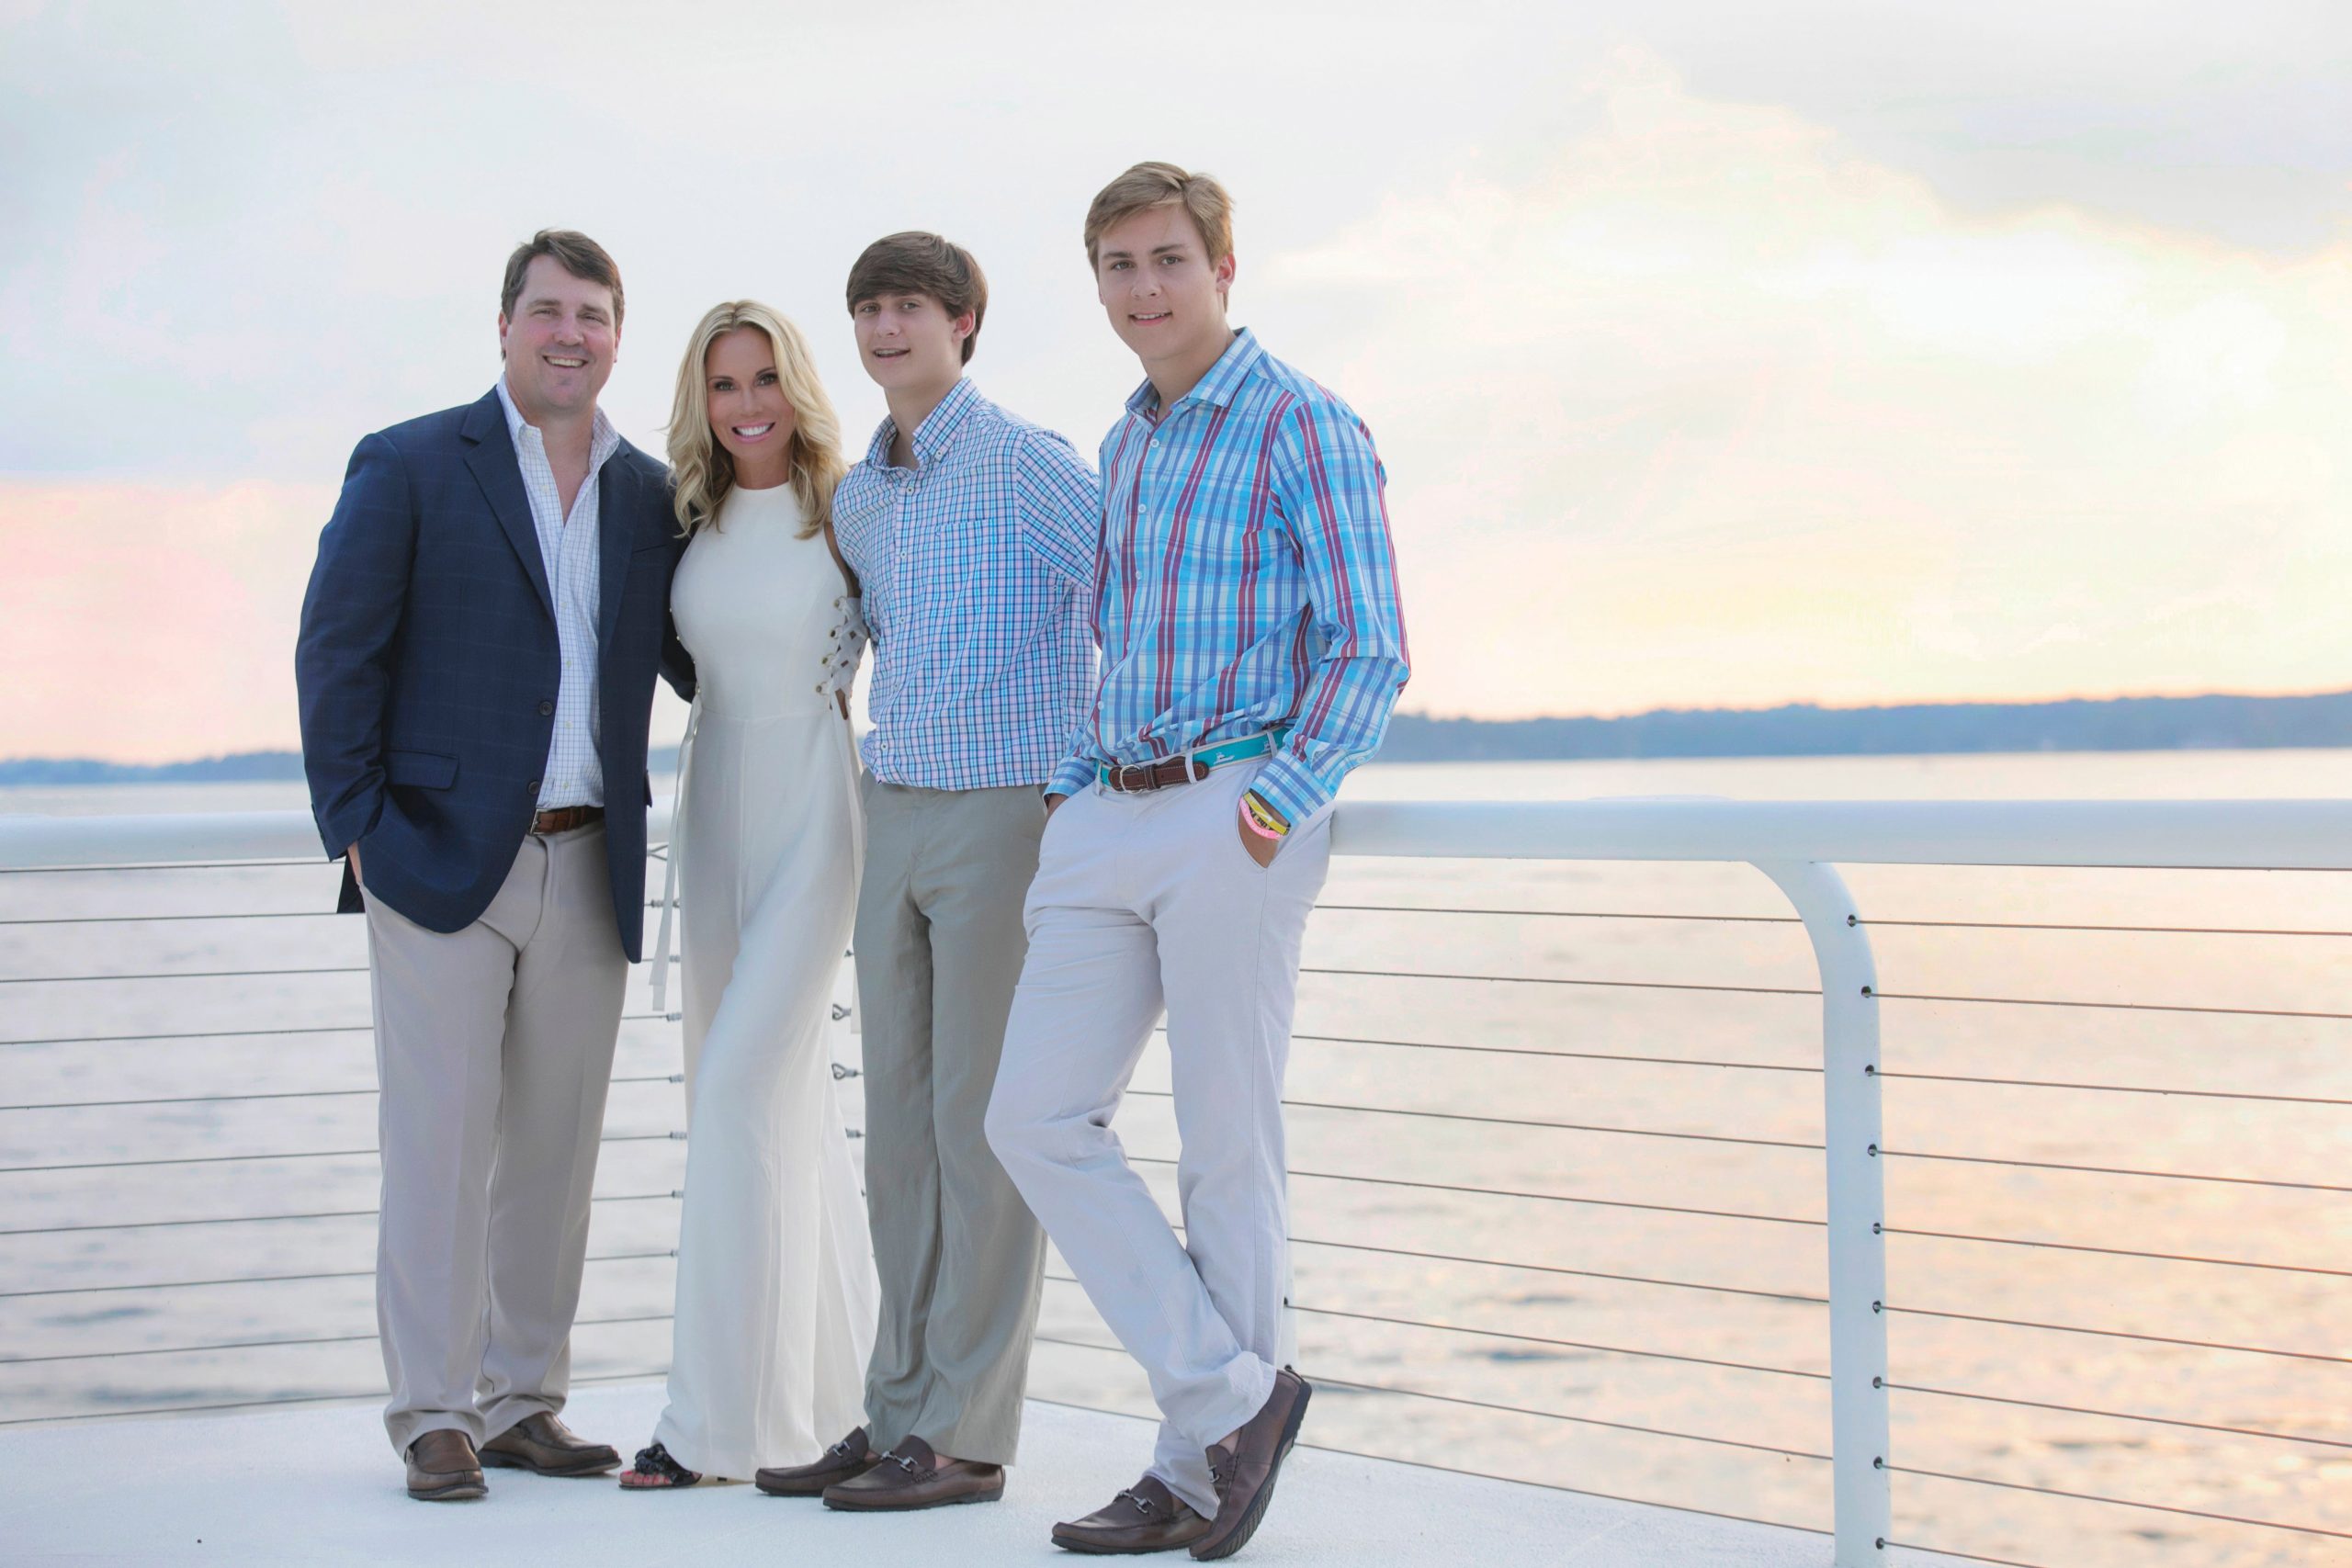 As the head coach’s wife, Carol Muschamp has an additional responsibility. “I want the other coaches’ wives to be happy because we couldn’t succeed without the work they do behind the scenes.”
Will Muschamp, Carol Muschamp, Whit Muschamp, and Jackson Muschamp.